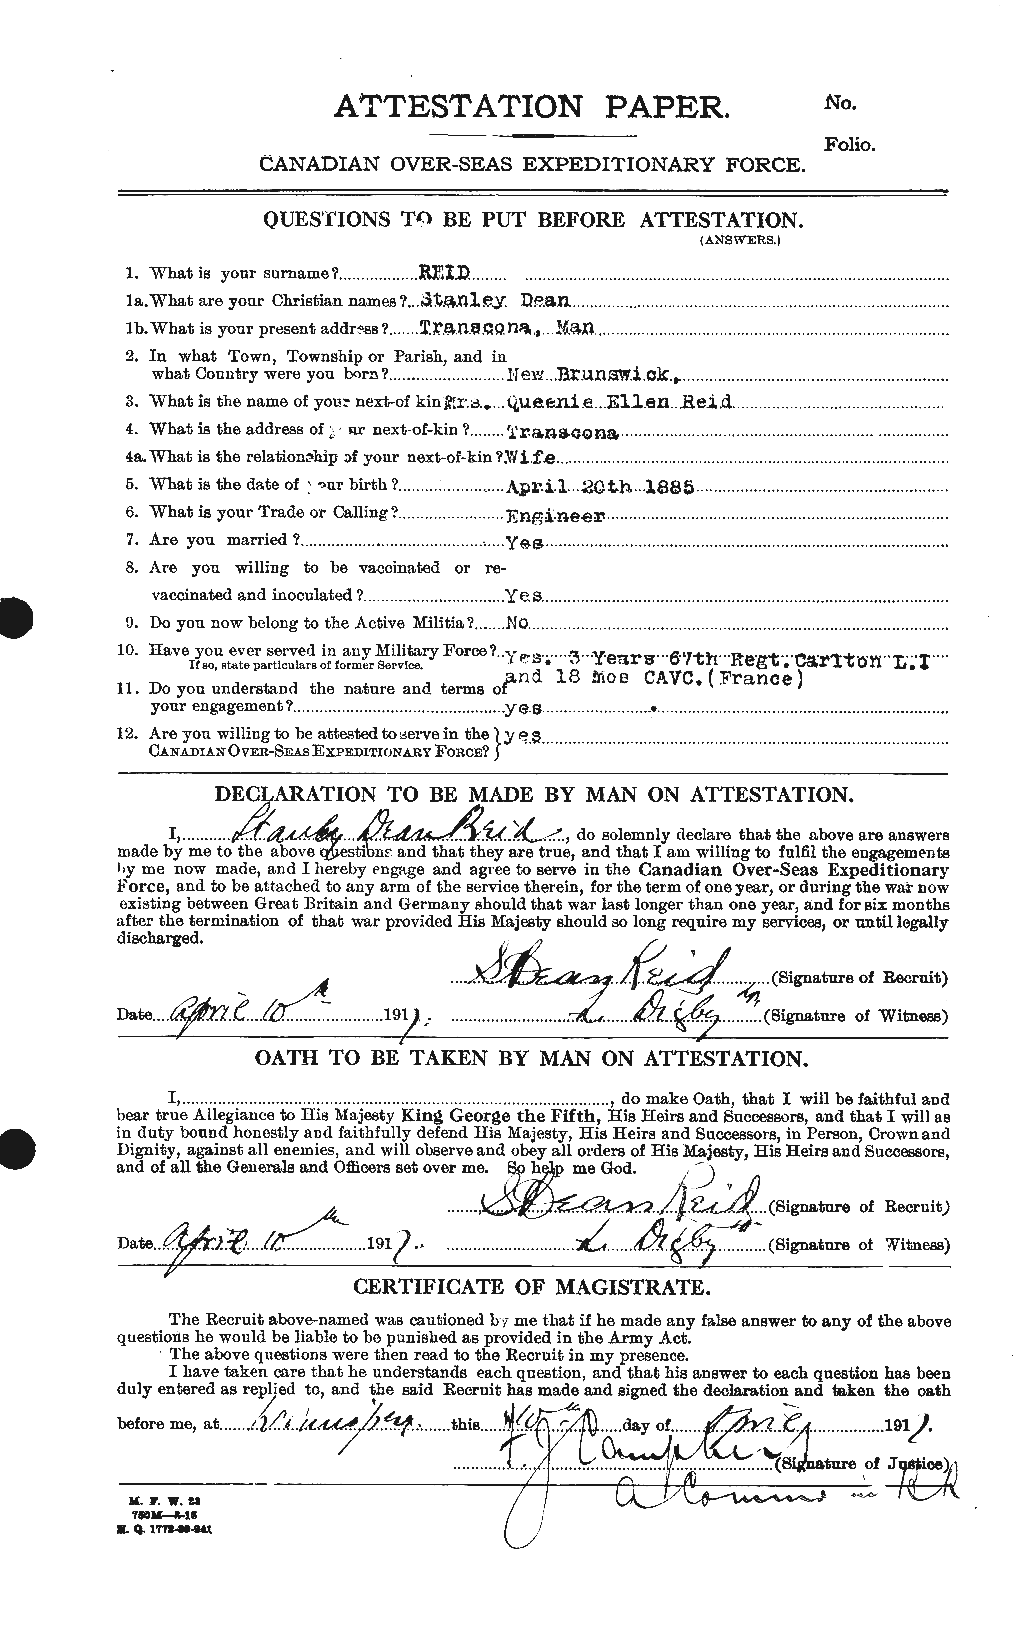 Personnel Records of the First World War - CEF 601968a